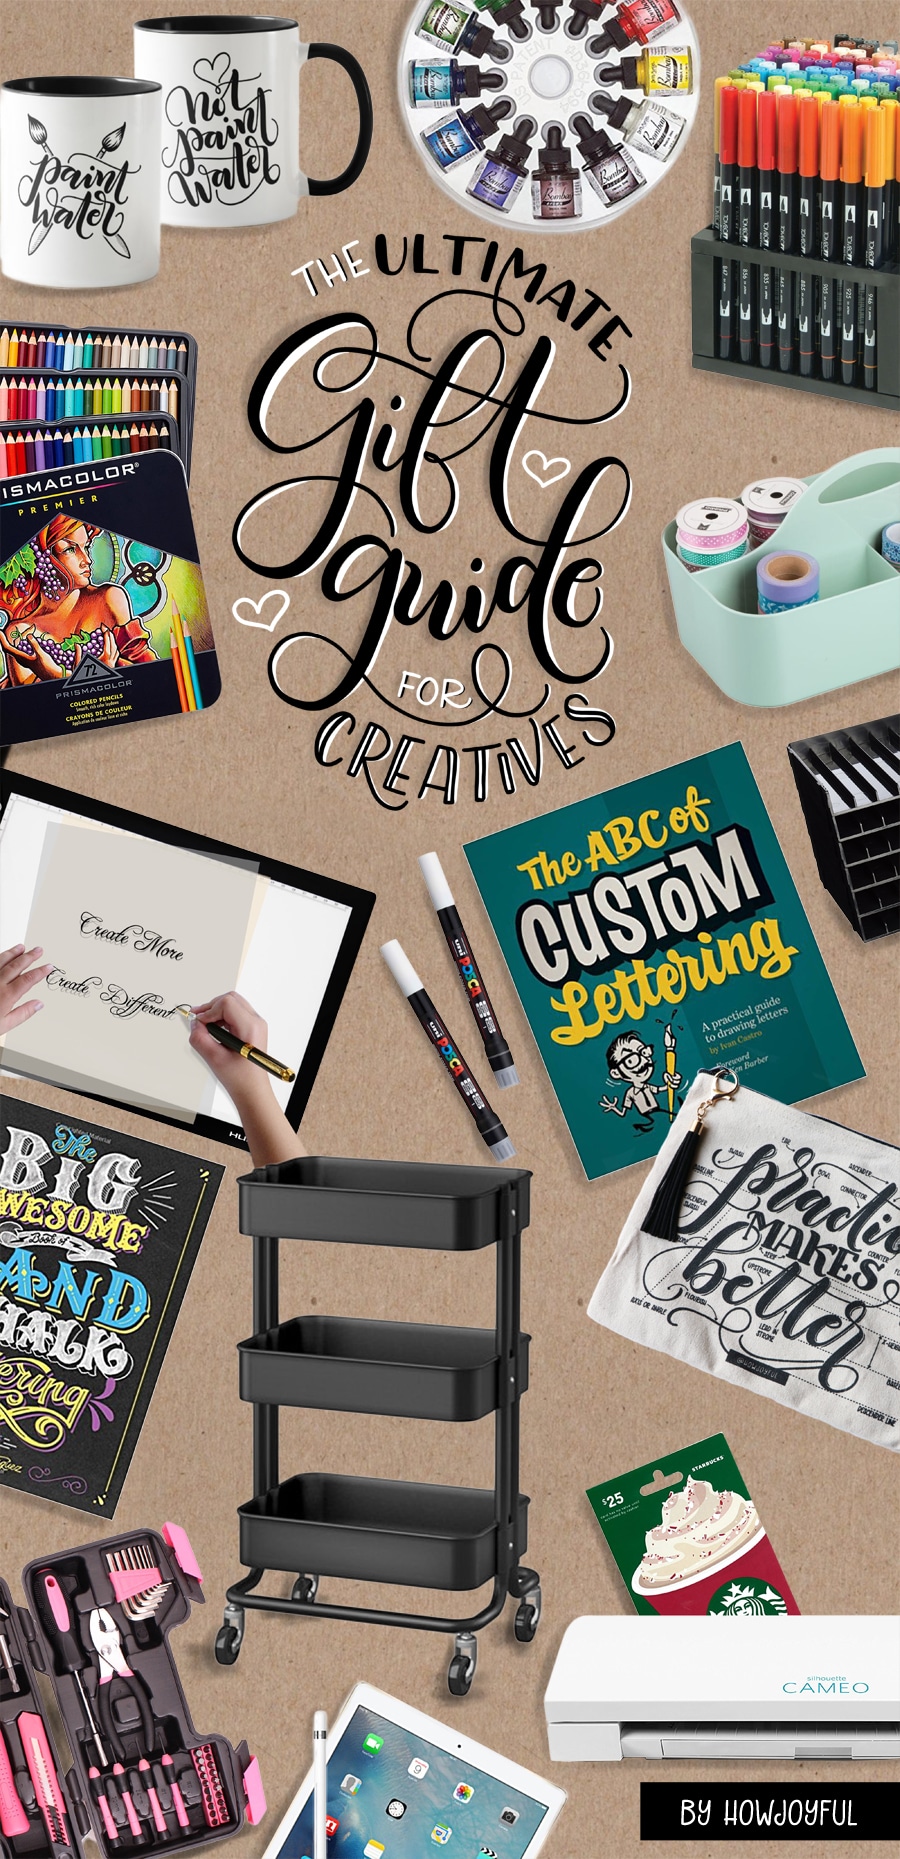 The ultimate gift guide for creatives